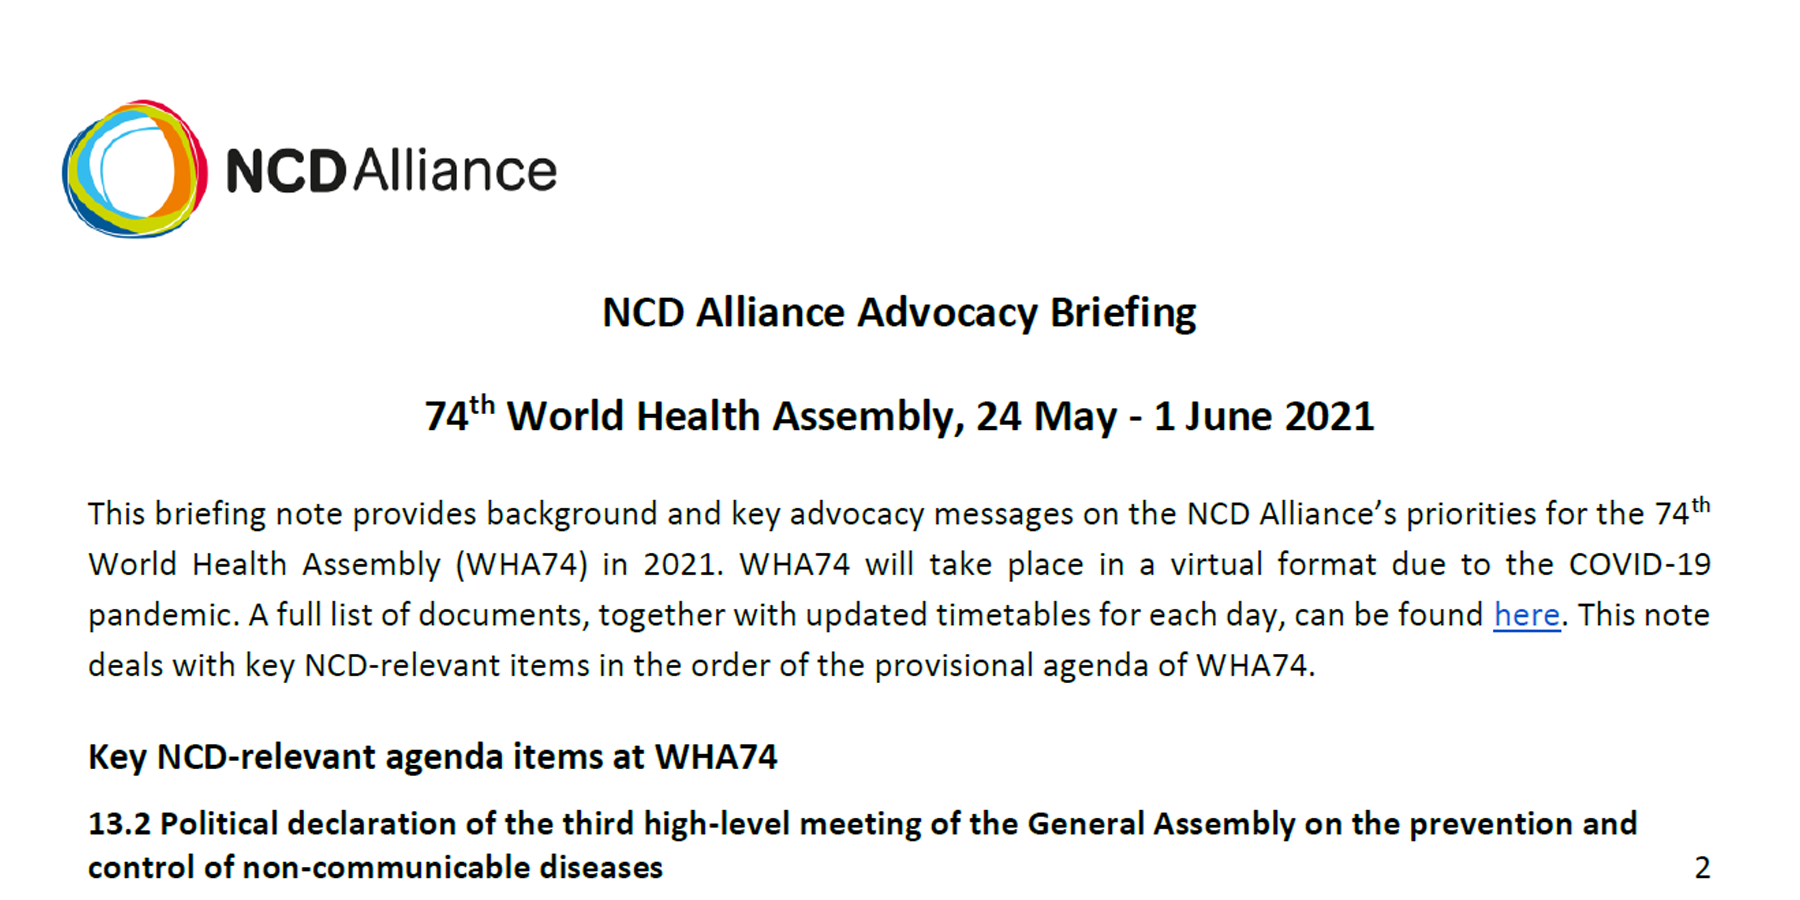 WHA74 ADVOCACY BRIEFING 2021